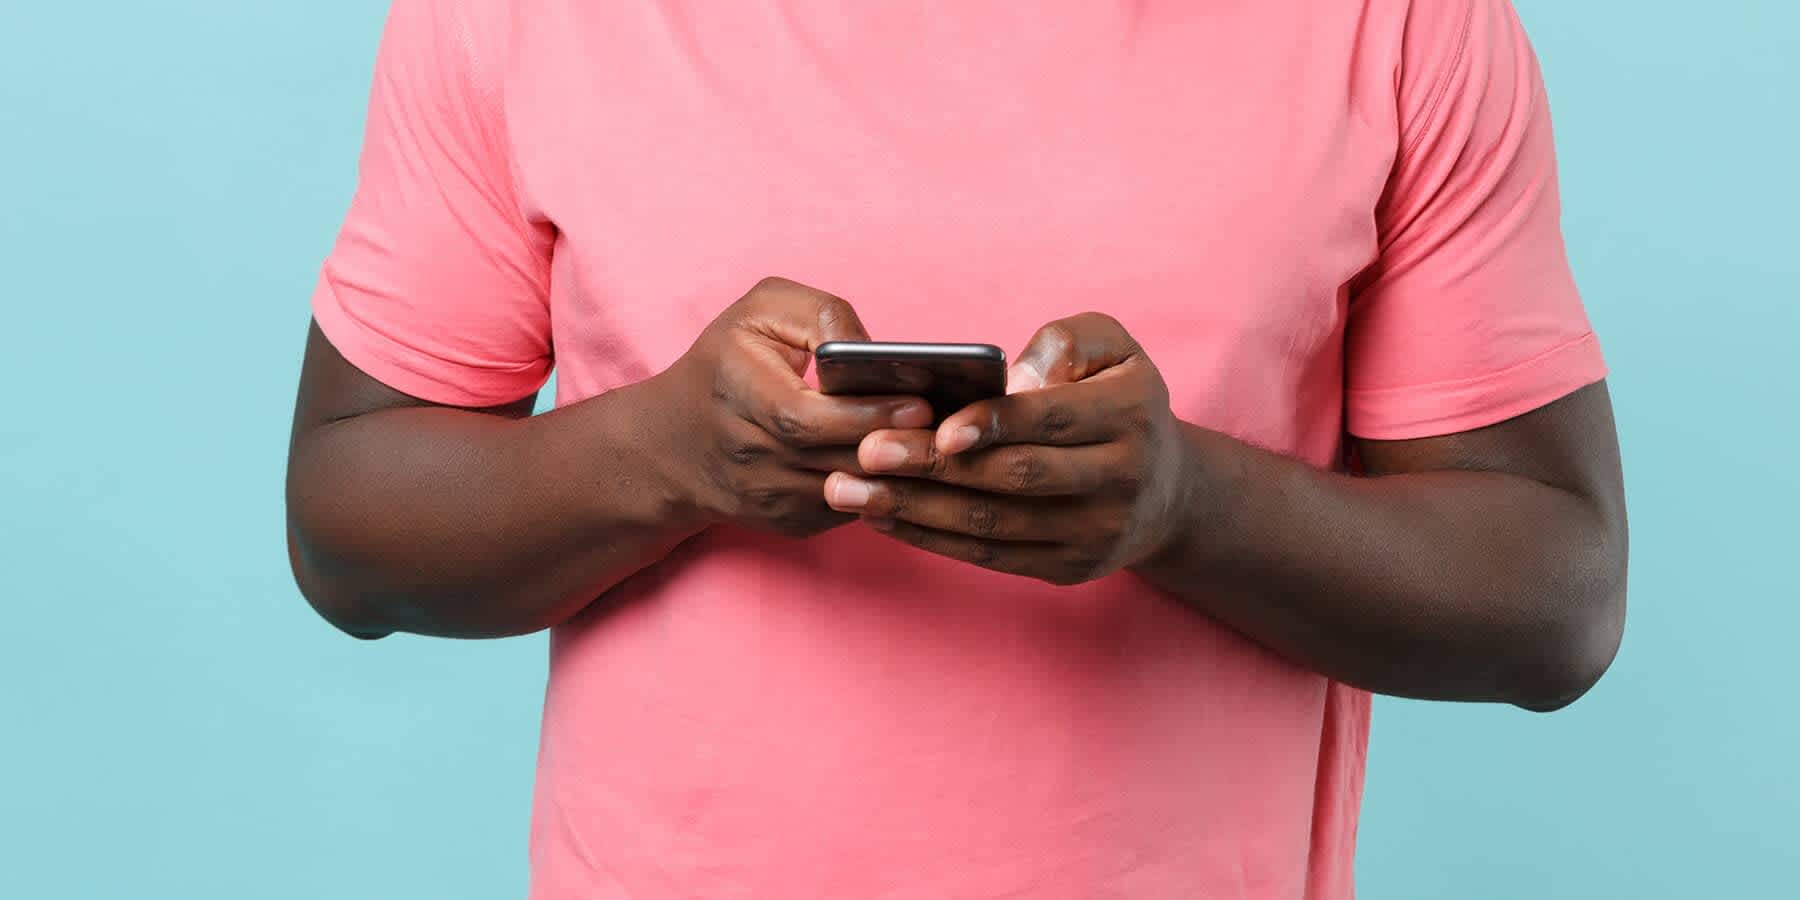 Man in pink shirt using mobile phone to look up how long a herpes outbreak lasts